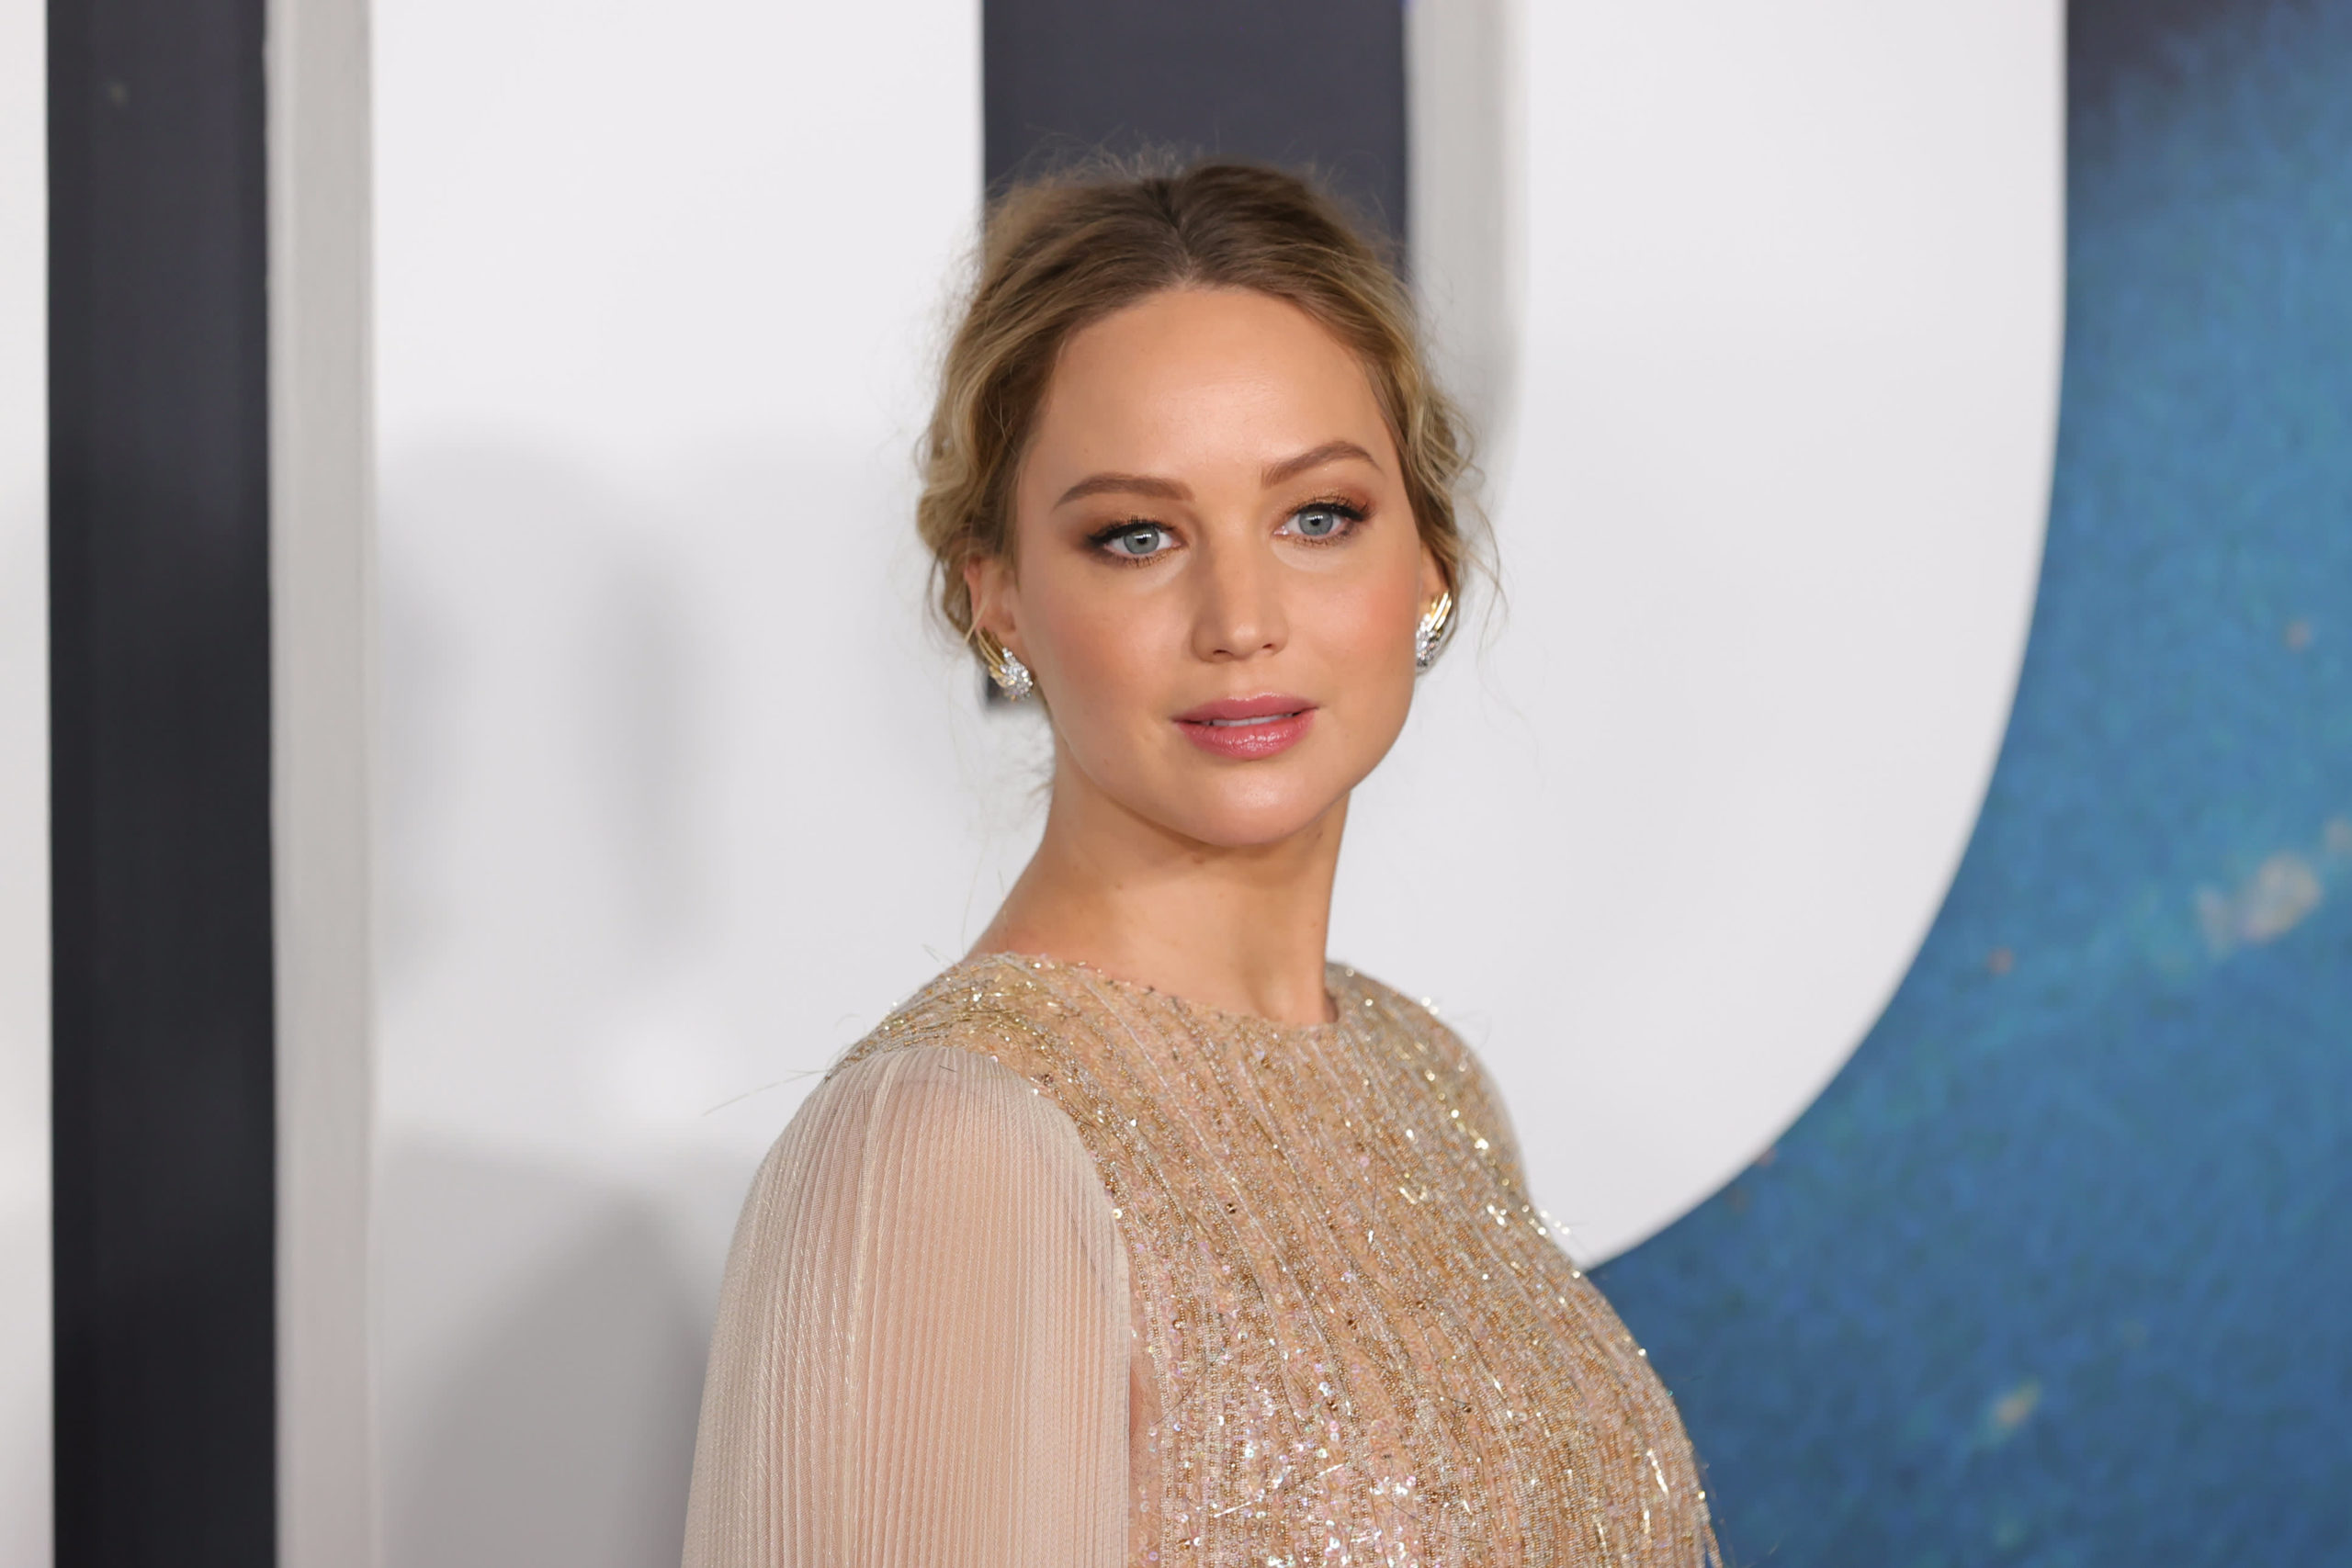 Jennifer Lawrence Biography [2022] Age, Height, Net Worth, Husband, Popular Movies, and TV Shows